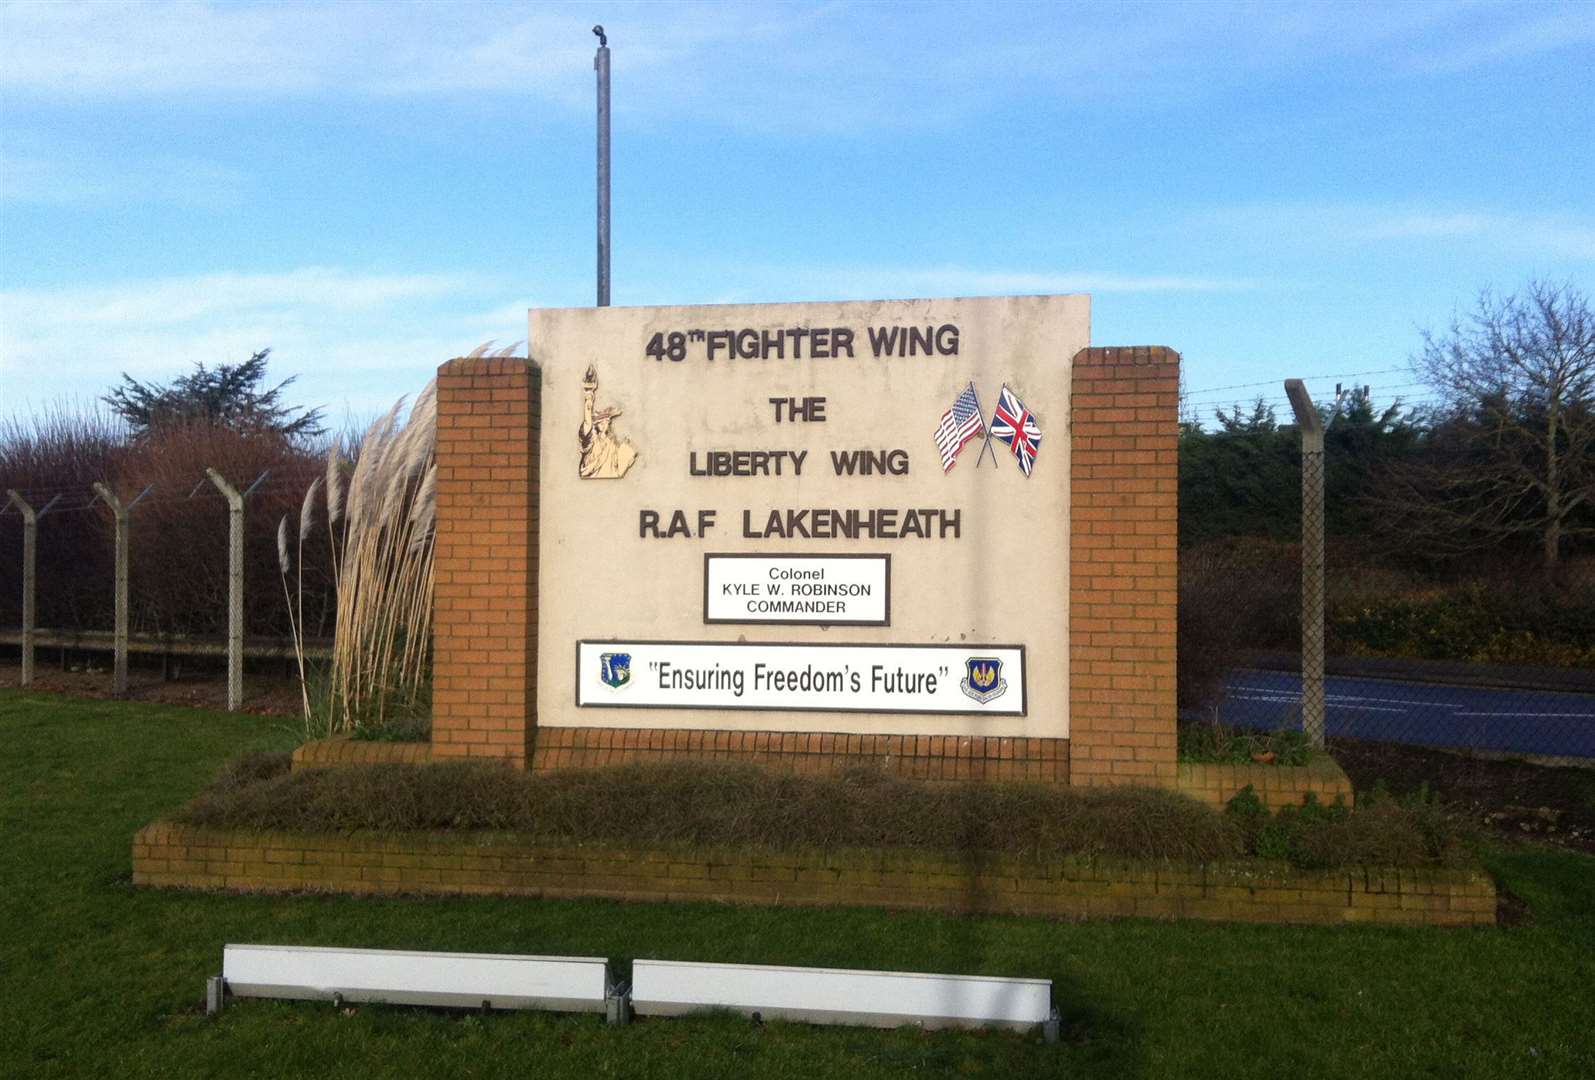 Hayes was stationed at RAF Lakenheath at the time of the incident (Emma Sword/PA)